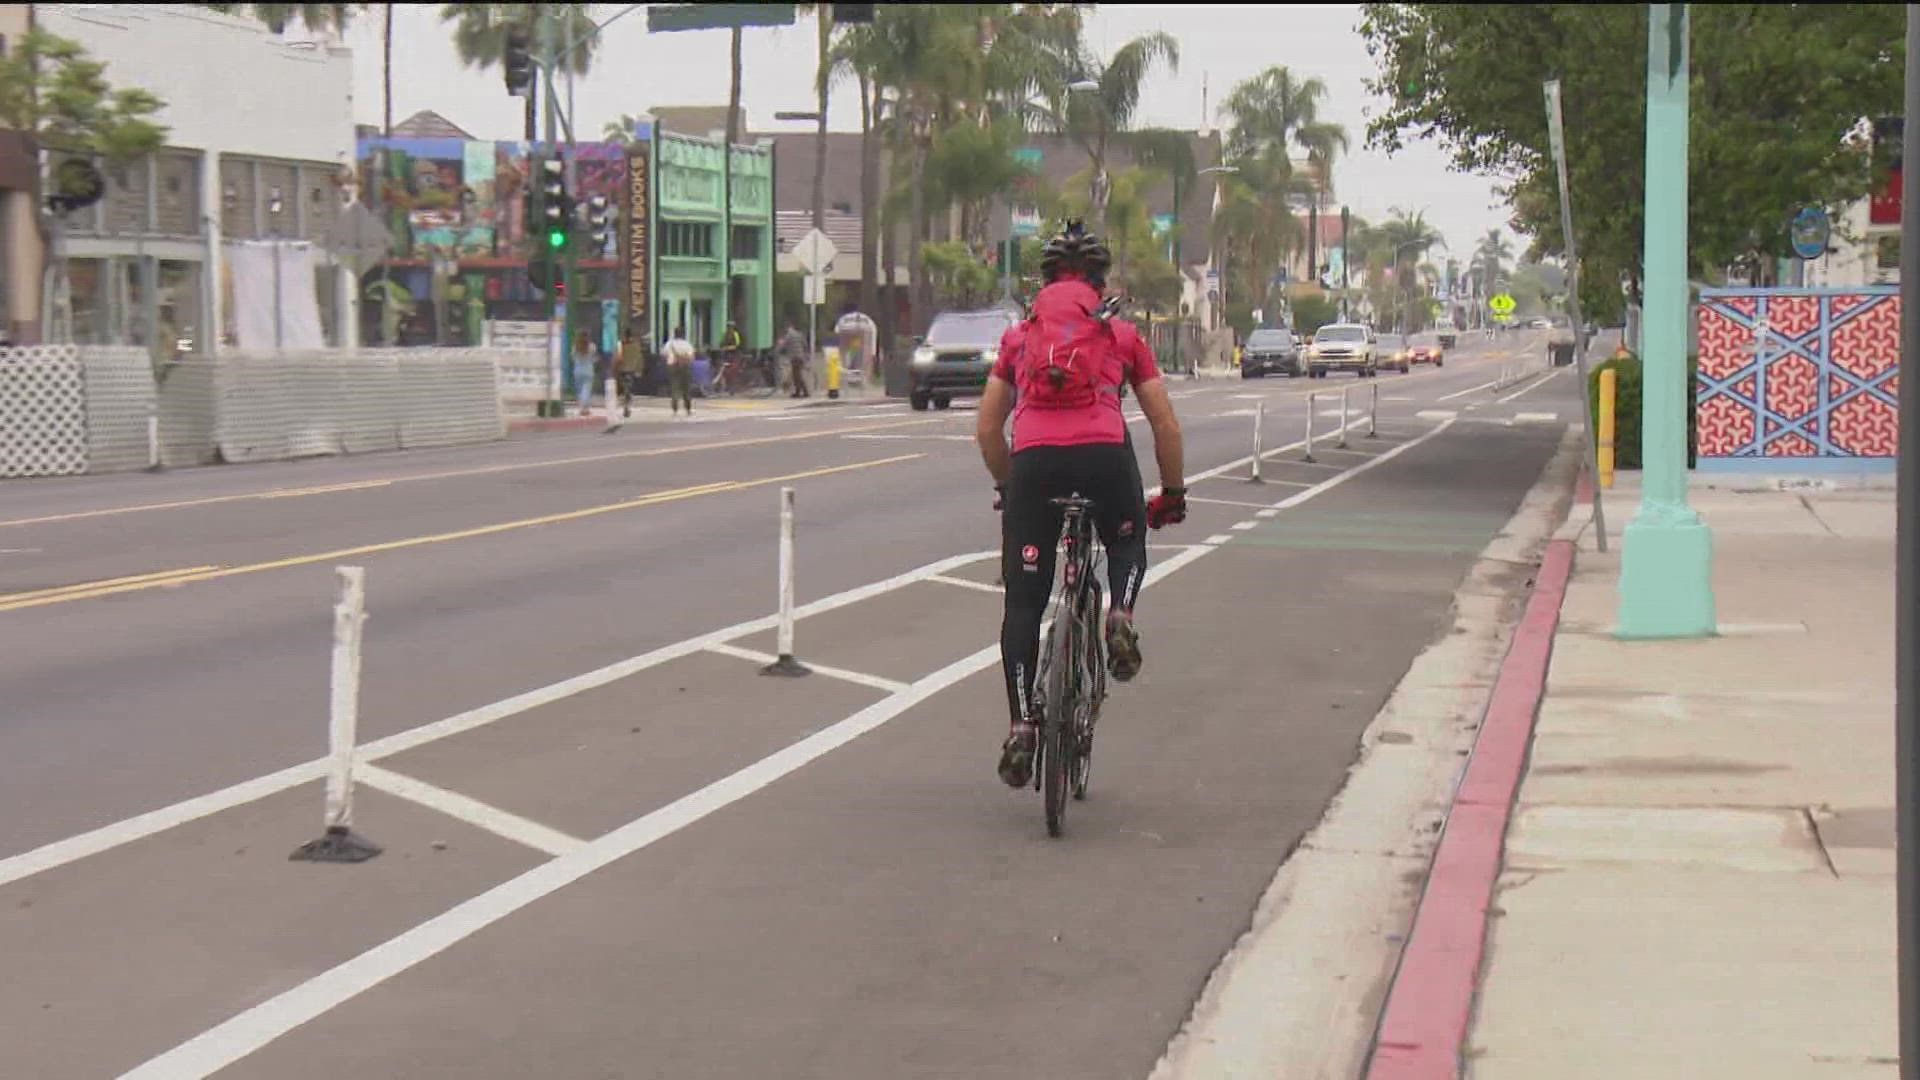 North Park, Mira Mesa and Rancho Penasquitos all have had new bike lanes installed within the past year. Were they being used on Bike to Work Day?